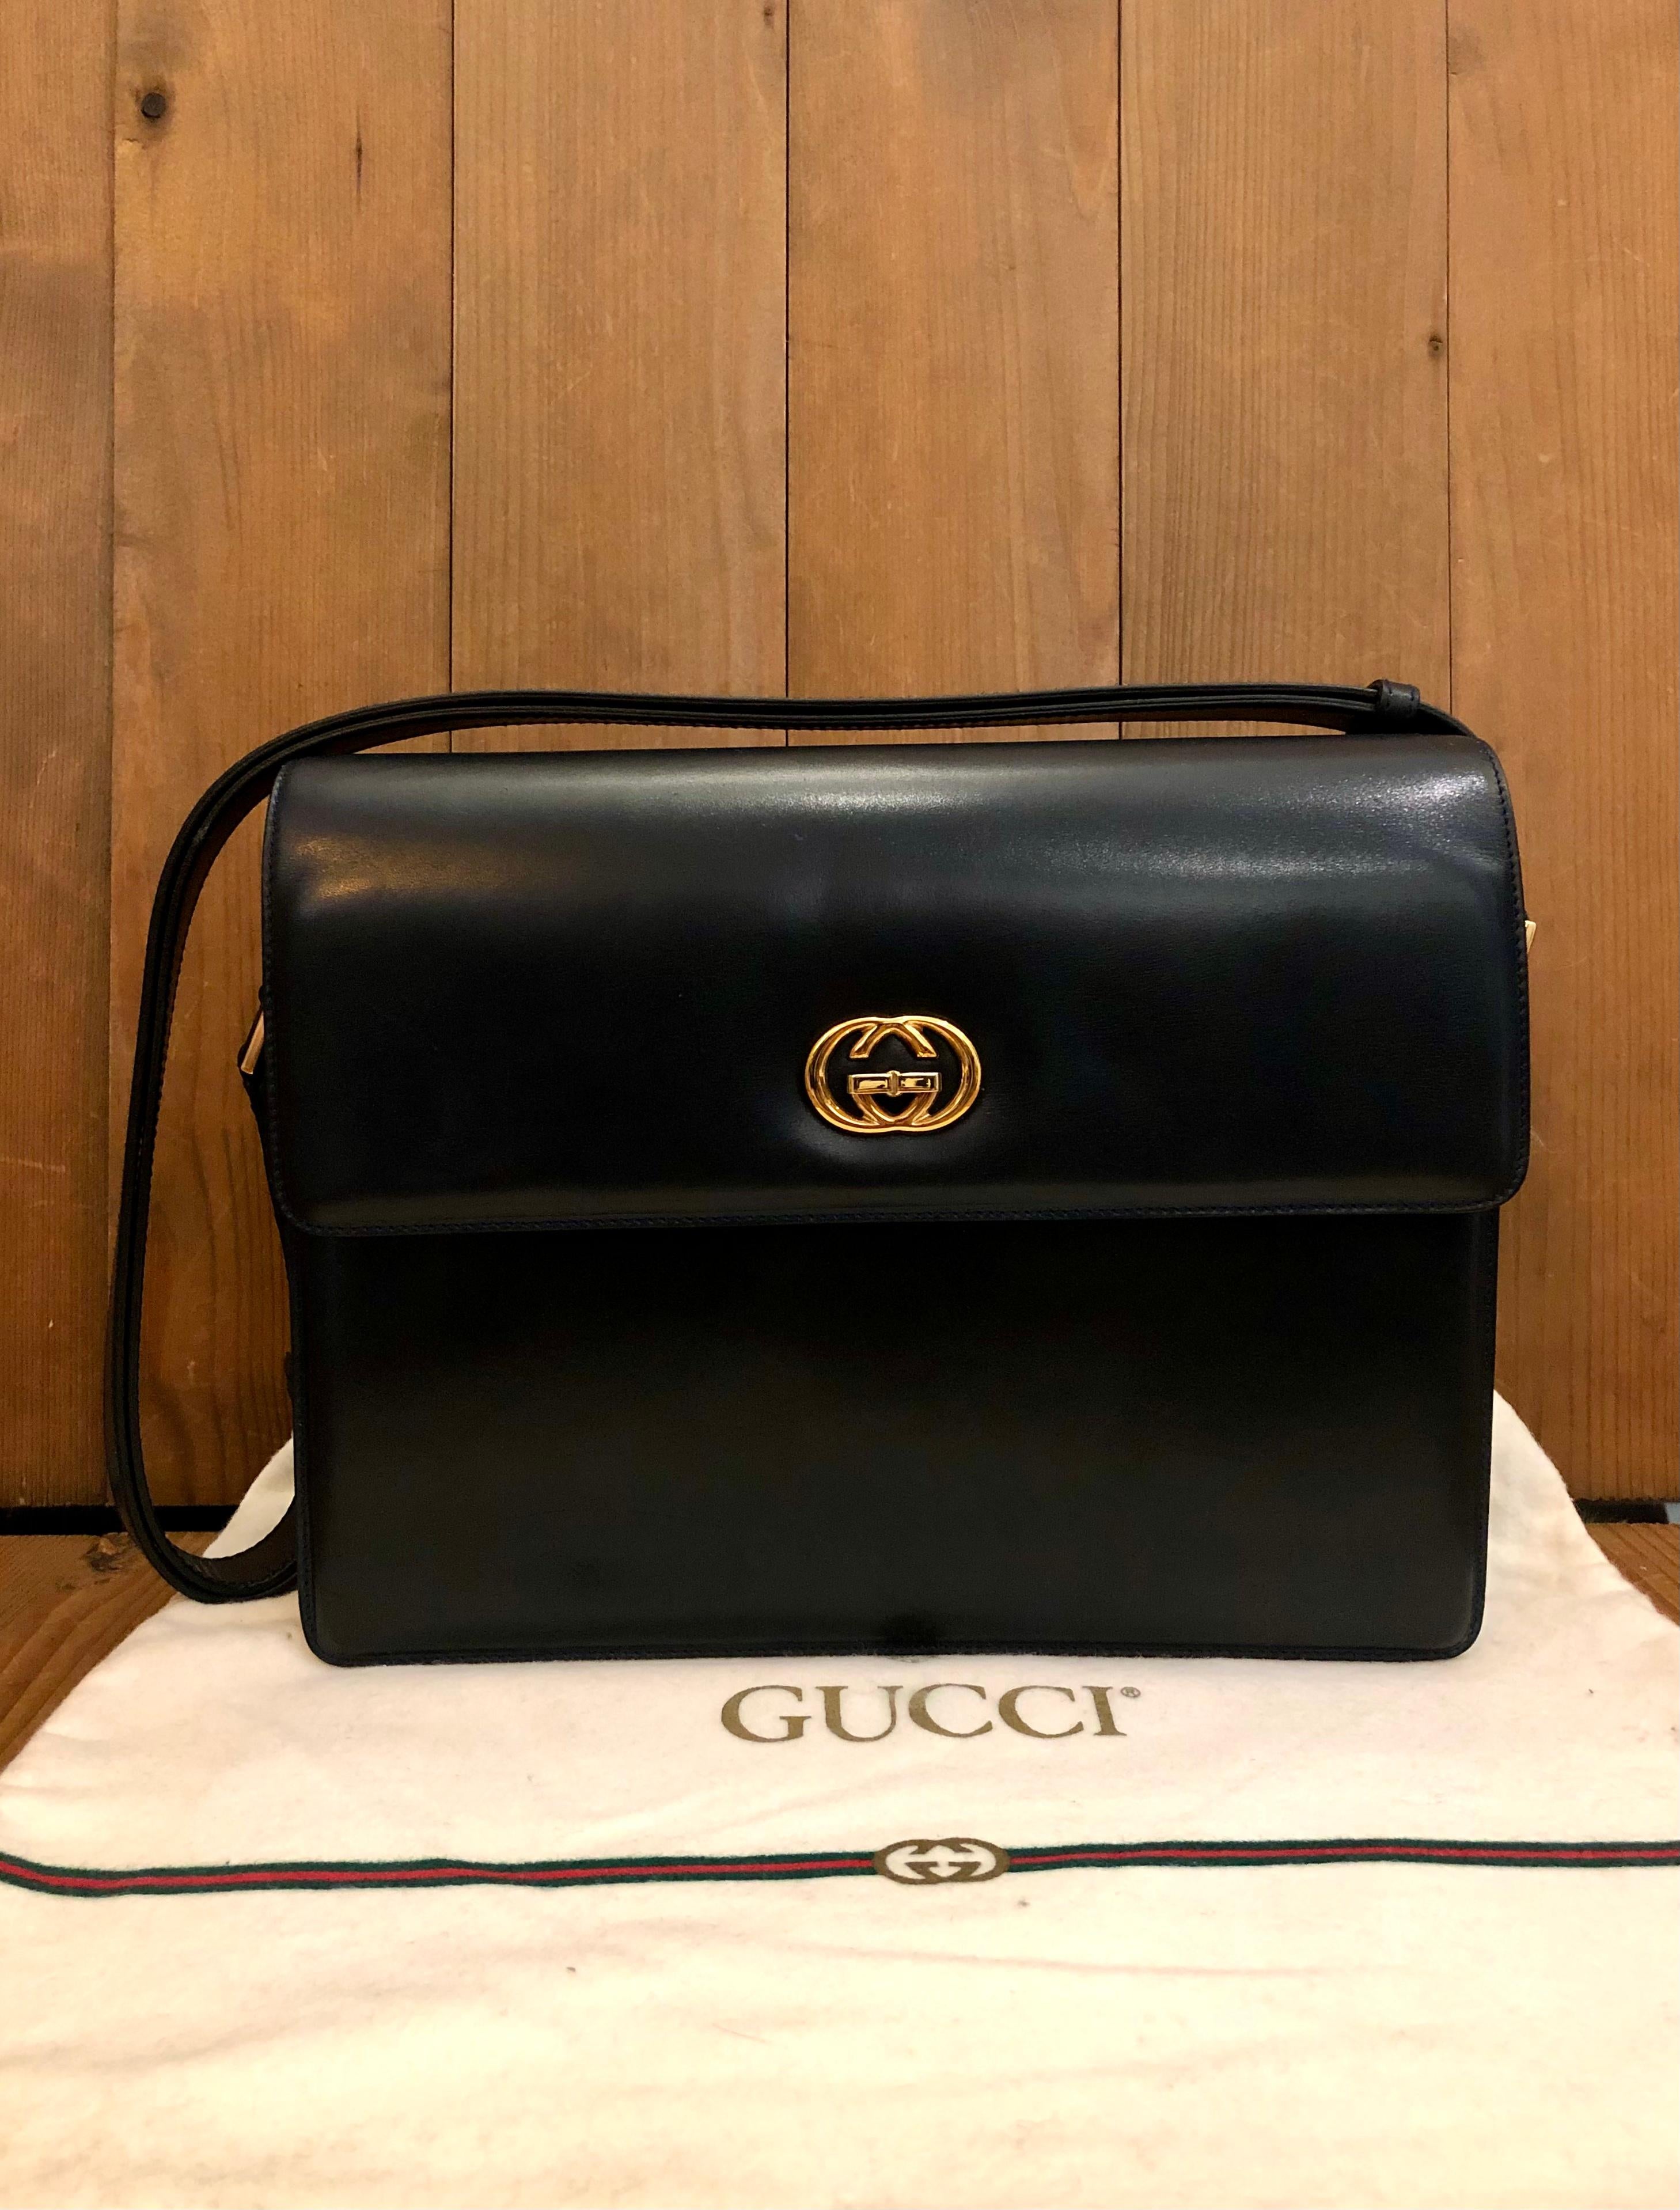 This vintage GUCCI shoulder crossbody bag is crafted of smooth calfskin leather in dark navy featuring gold toned hardware. Front flap GG turnlock closure opens to a navy leather interior featuring a zippered pocket. Adjustable leather strap allows